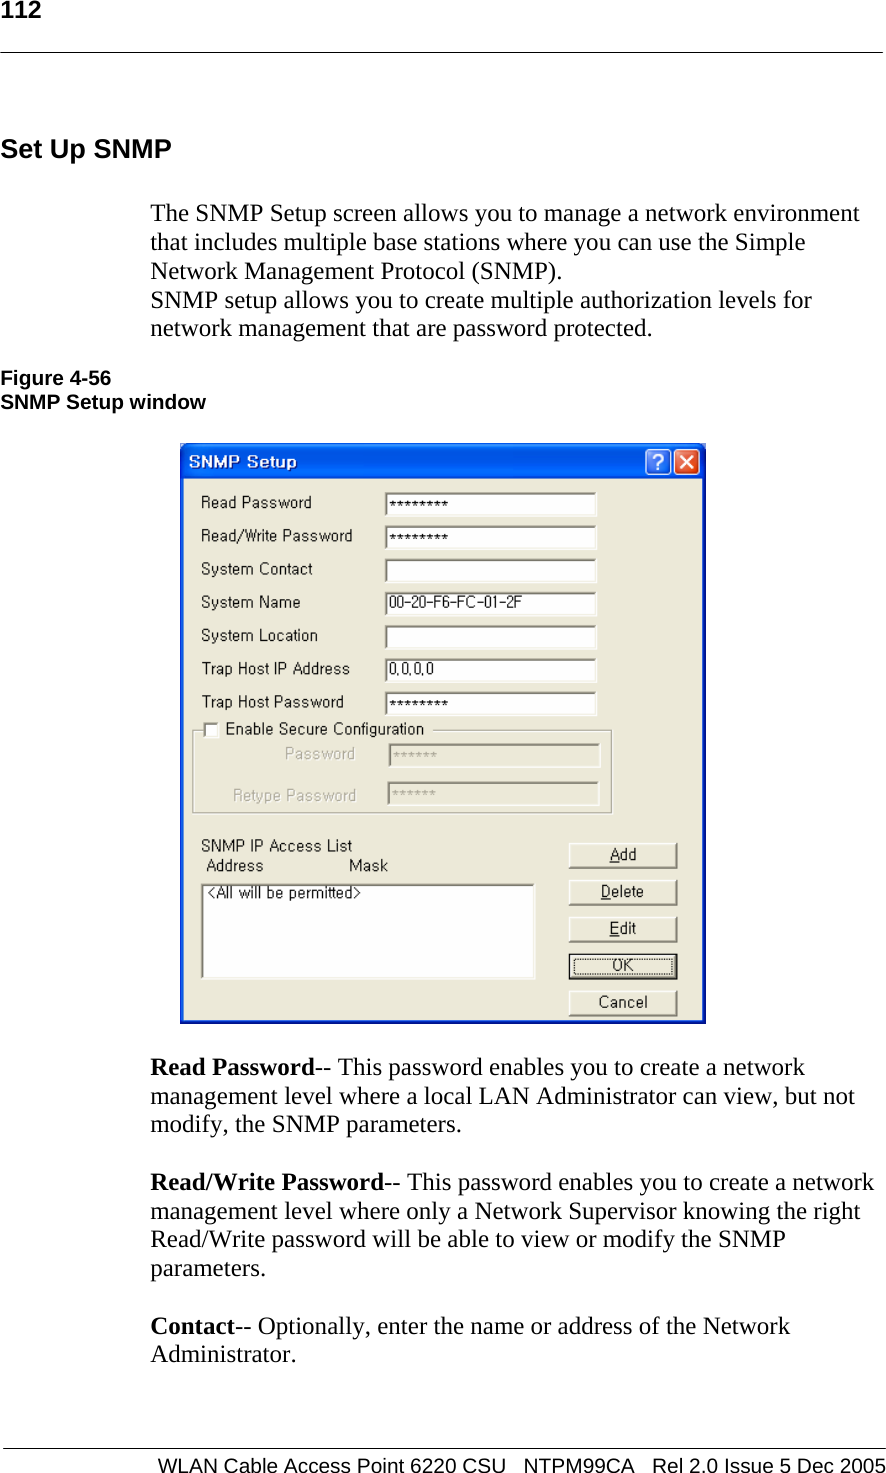   112  WLAN Cable Access Point 6220 CSU   NTPM99CA   Rel 2.0 Issue 5 Dec 2005 Set Up SNMP  The SNMP Setup screen allows you to manage a network environment that includes multiple base stations where you can use the Simple Network Management Protocol (SNMP).  SNMP setup allows you to create multiple authorization levels for network management that are password protected.  Figure 4-56 SNMP Setup window    Read Password-- This password enables you to create a network management level where a local LAN Administrator can view, but not modify, the SNMP parameters.  Read/Write Password-- This password enables you to create a network management level where only a Network Supervisor knowing the right Read/Write password will be able to view or modify the SNMP parameters.  Contact-- Optionally, enter the name or address of the Network Administrator.   